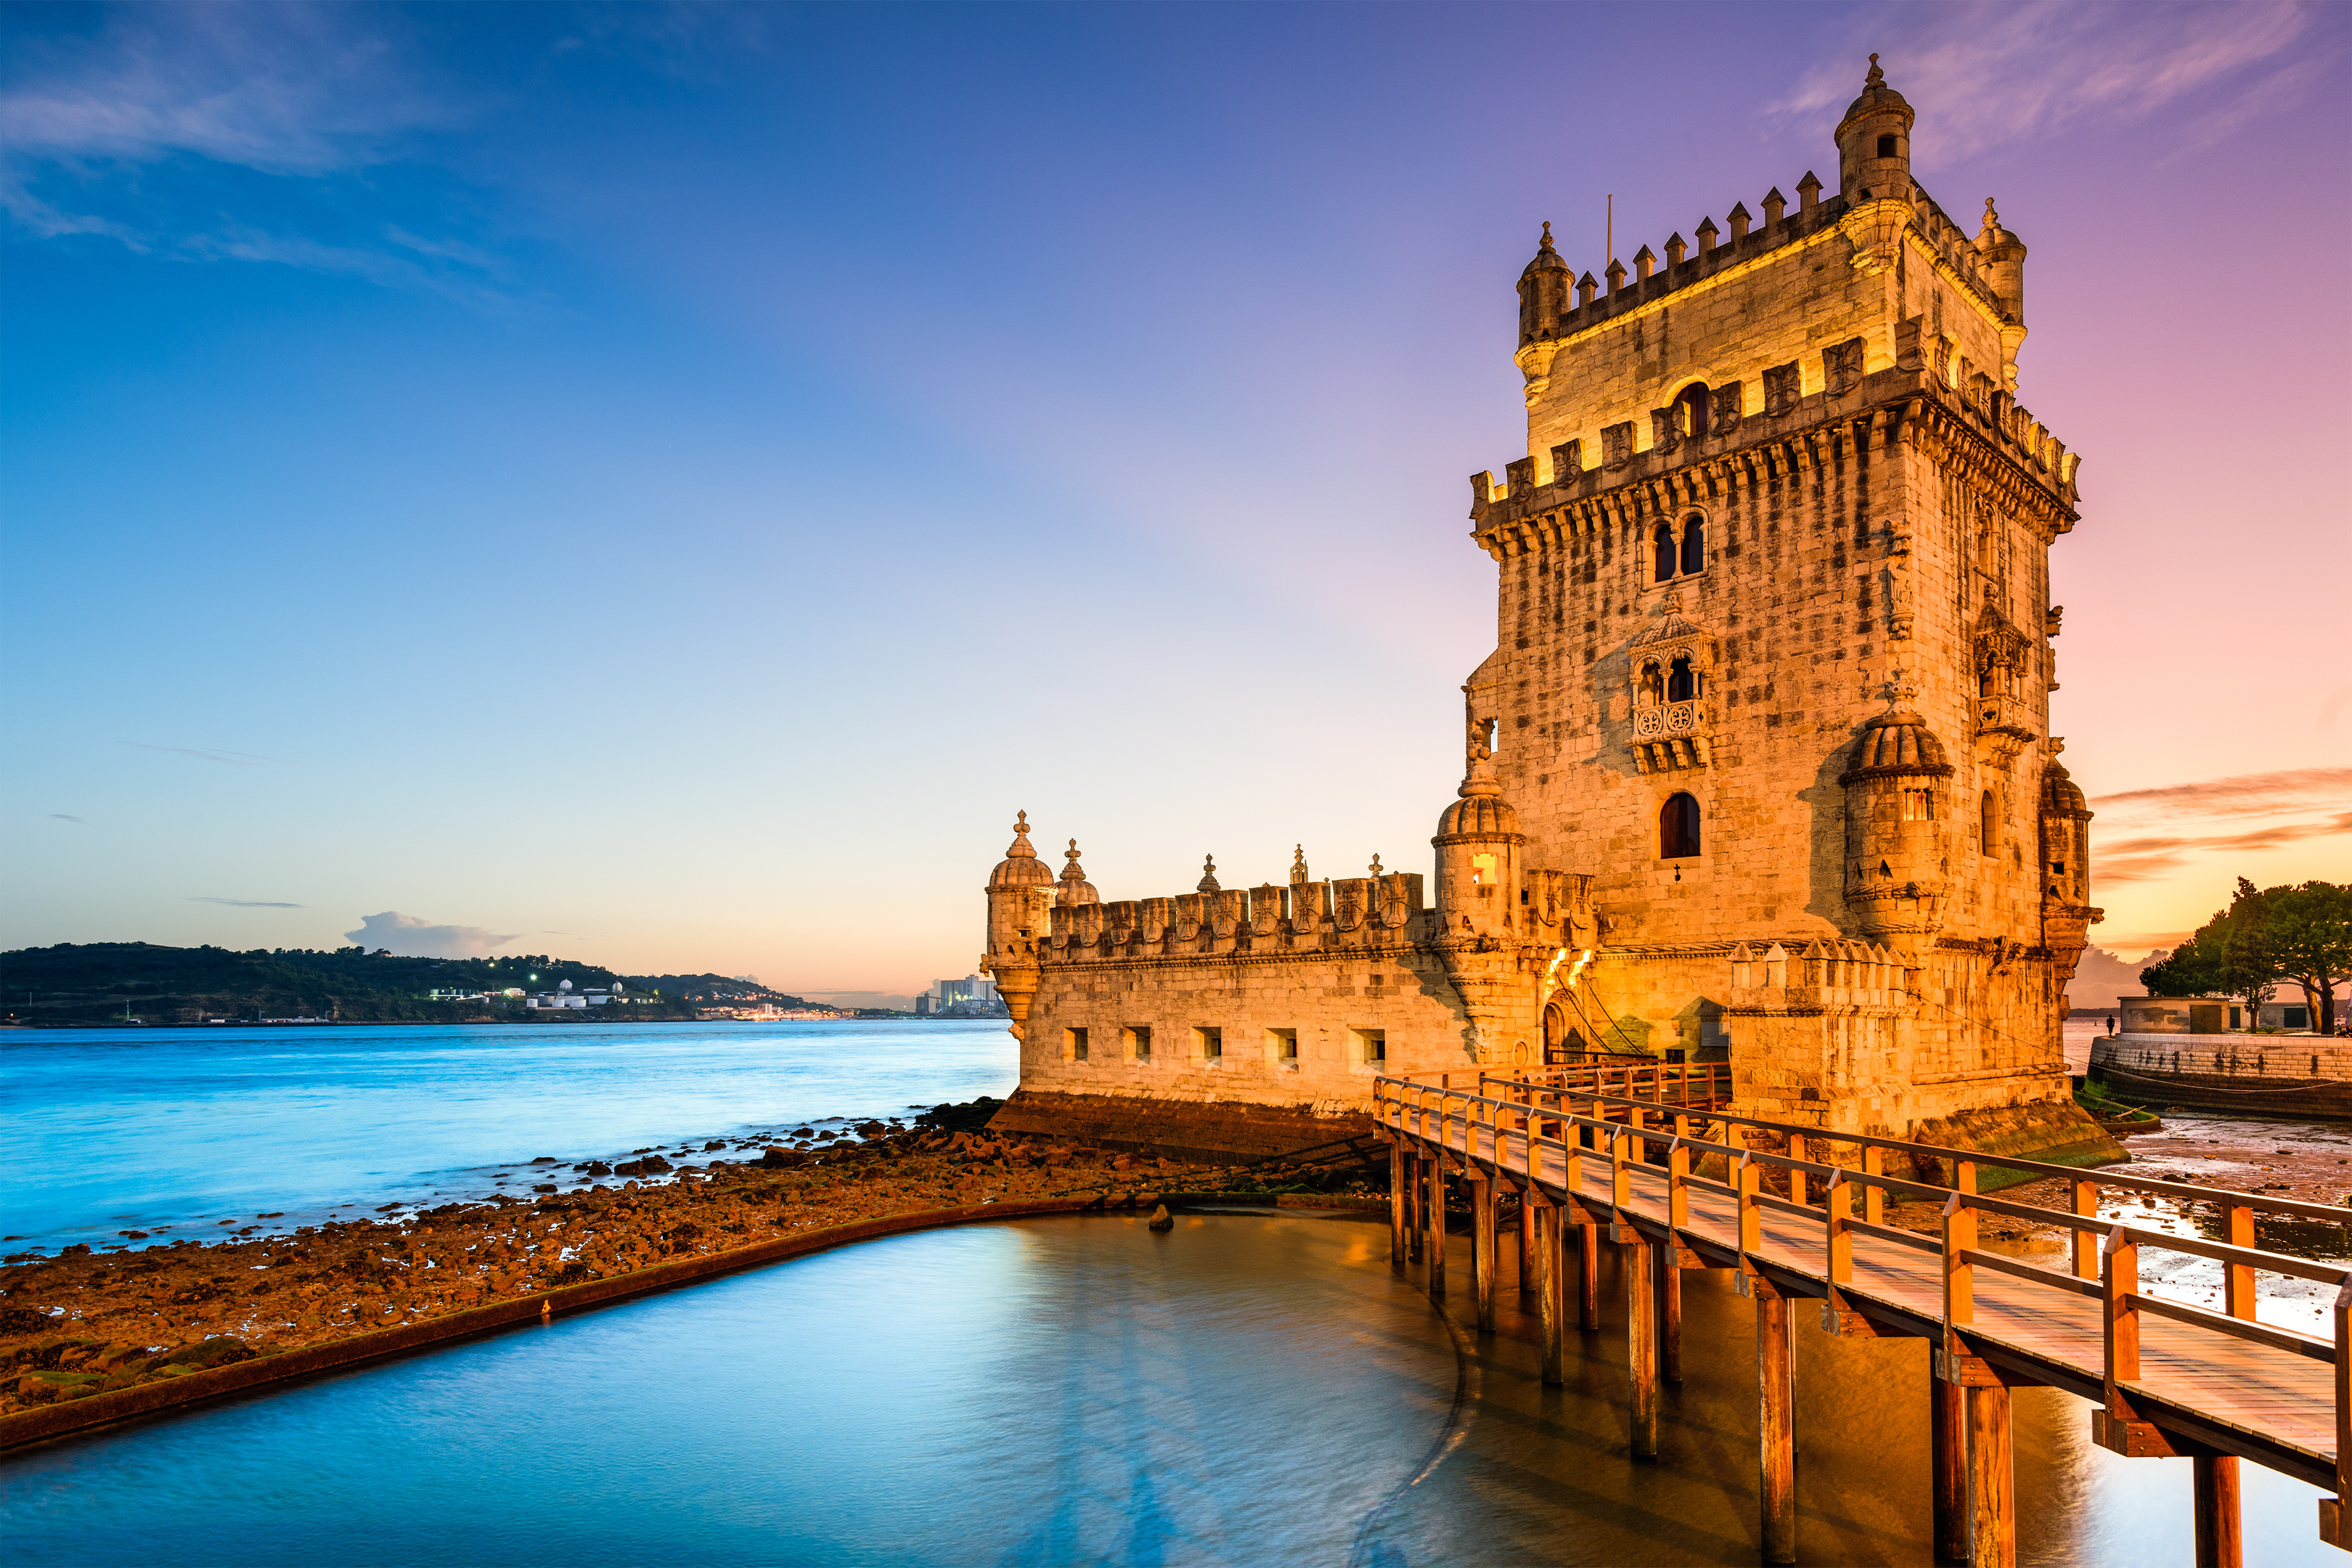 The Tower of St. Vincent, also known as Belem Tower, on the Tagus River. Lisbon, Portugal (iStock)